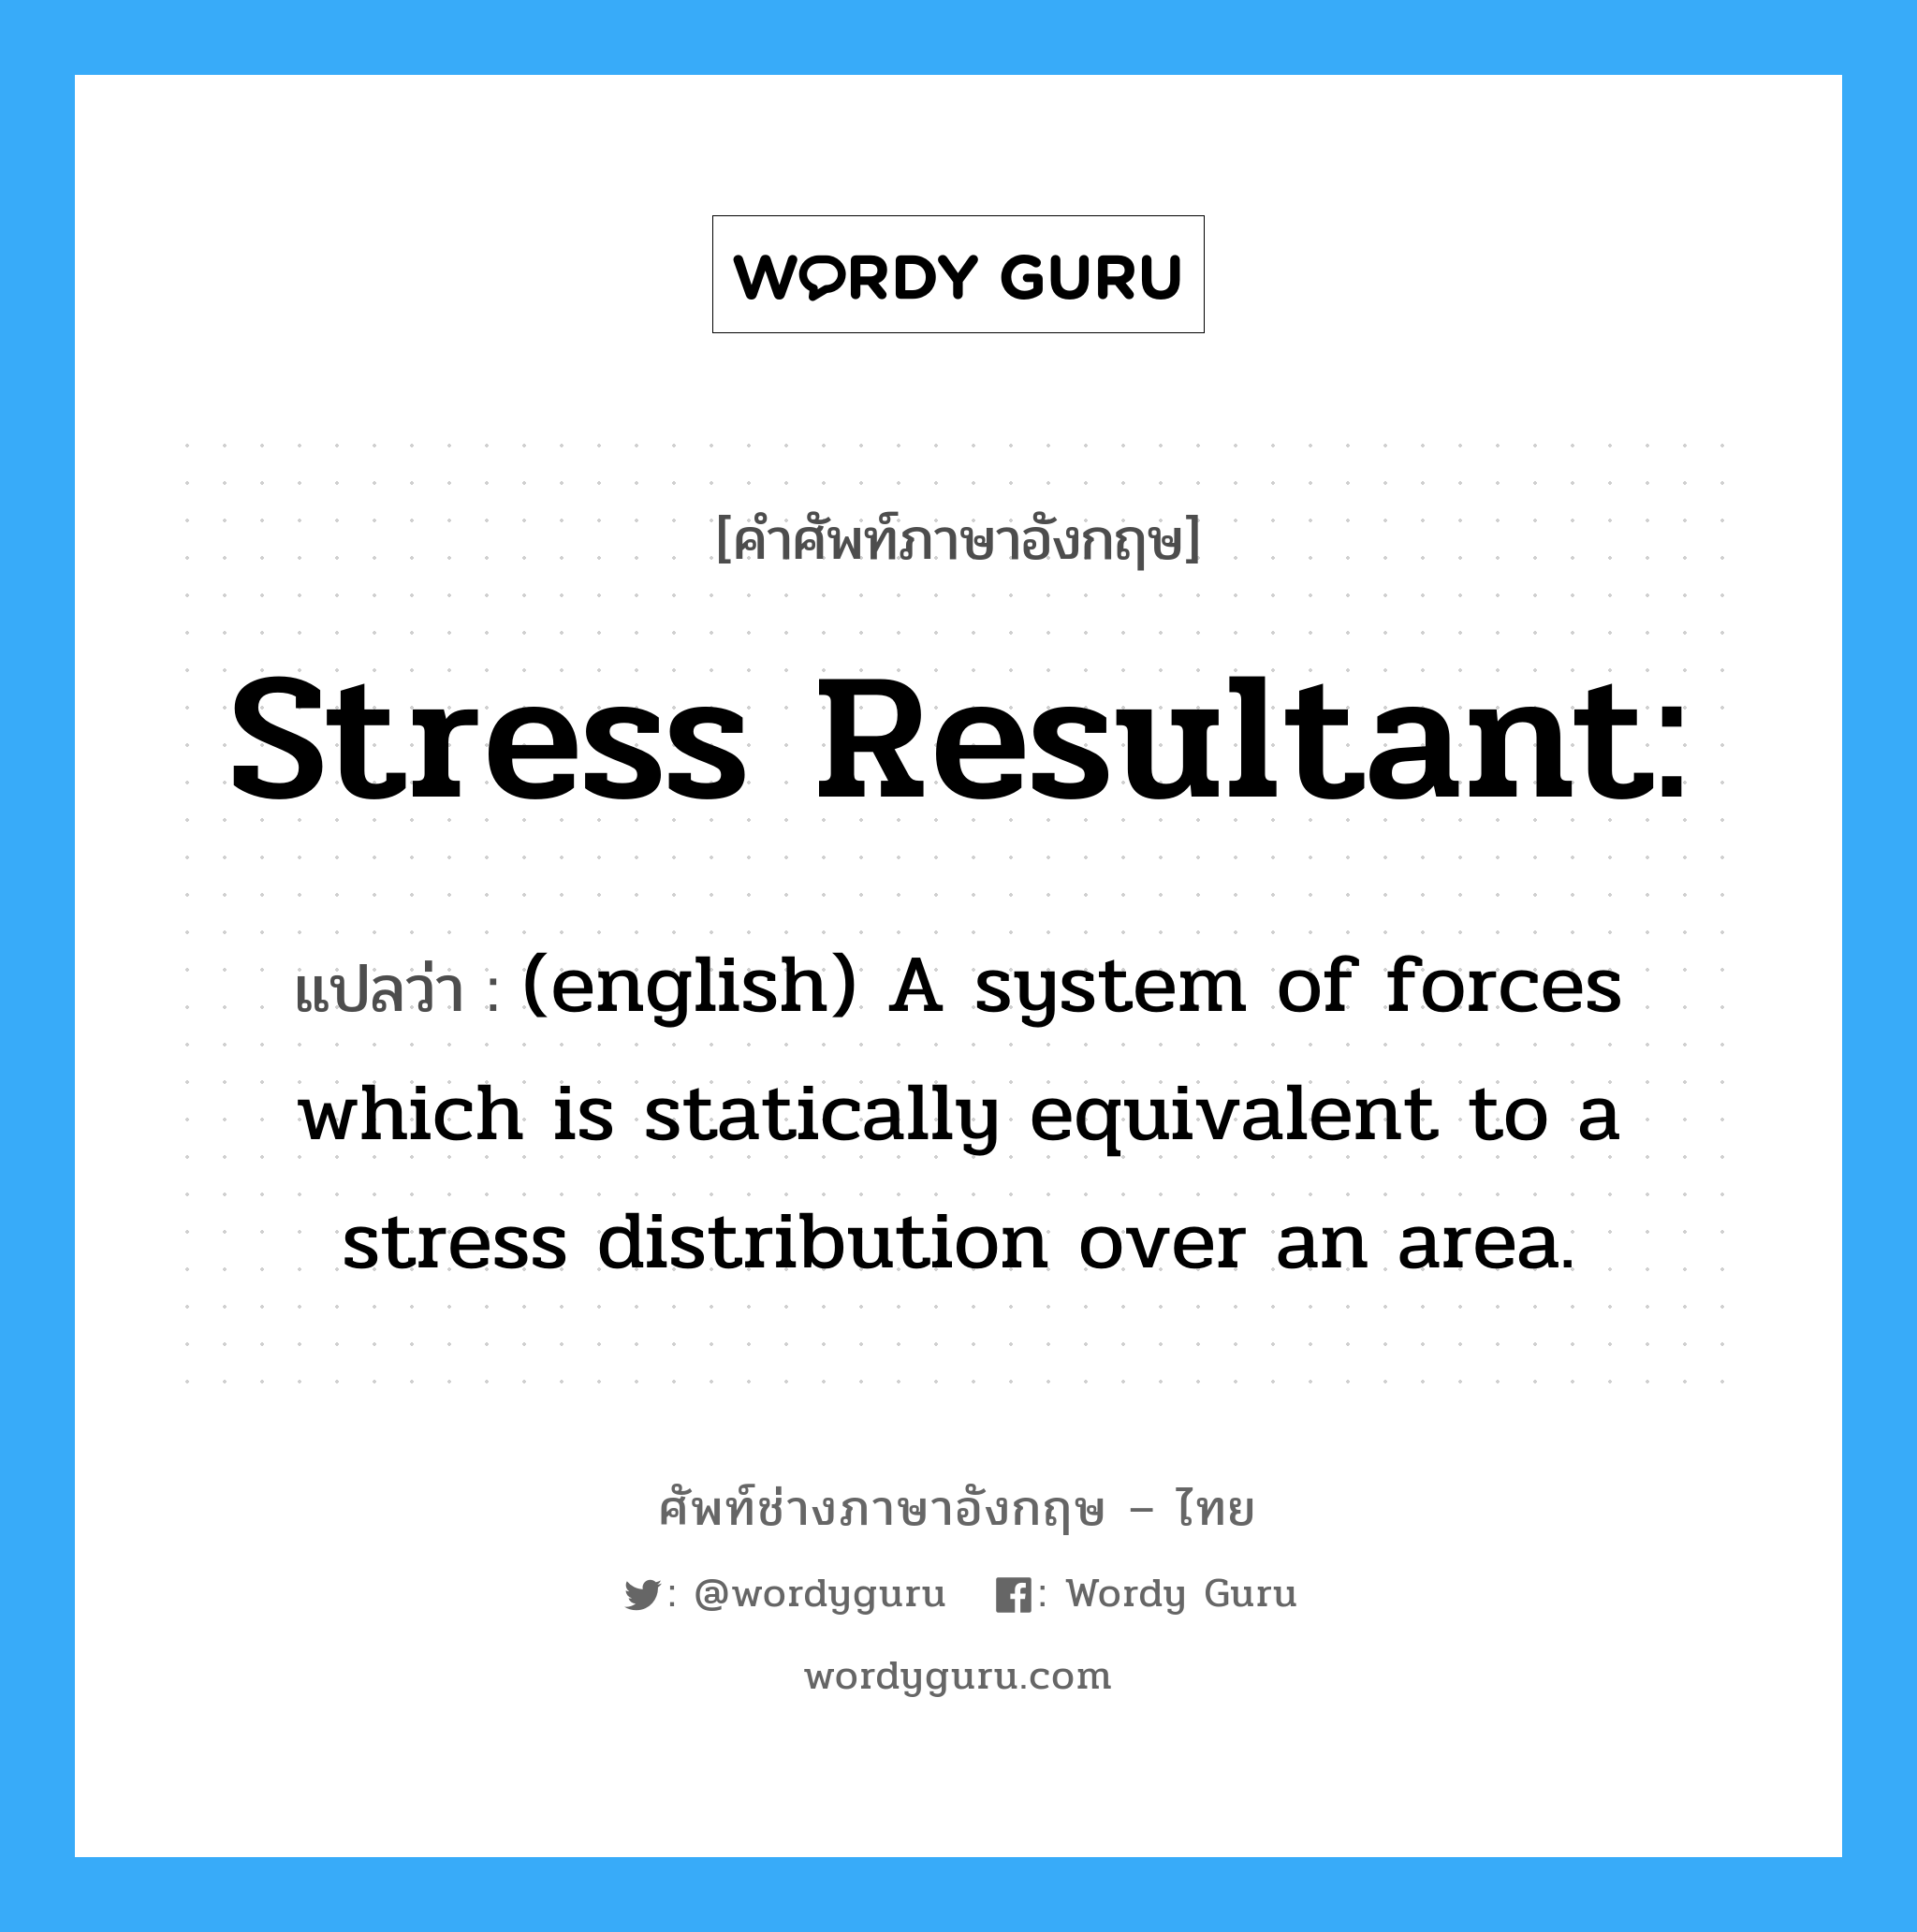 Stress resultant: แปลว่า?, คำศัพท์ช่างภาษาอังกฤษ - ไทย Stress resultant: คำศัพท์ภาษาอังกฤษ Stress resultant: แปลว่า (english) A system of forces which is statically equivalent to a stress distribution over an area.